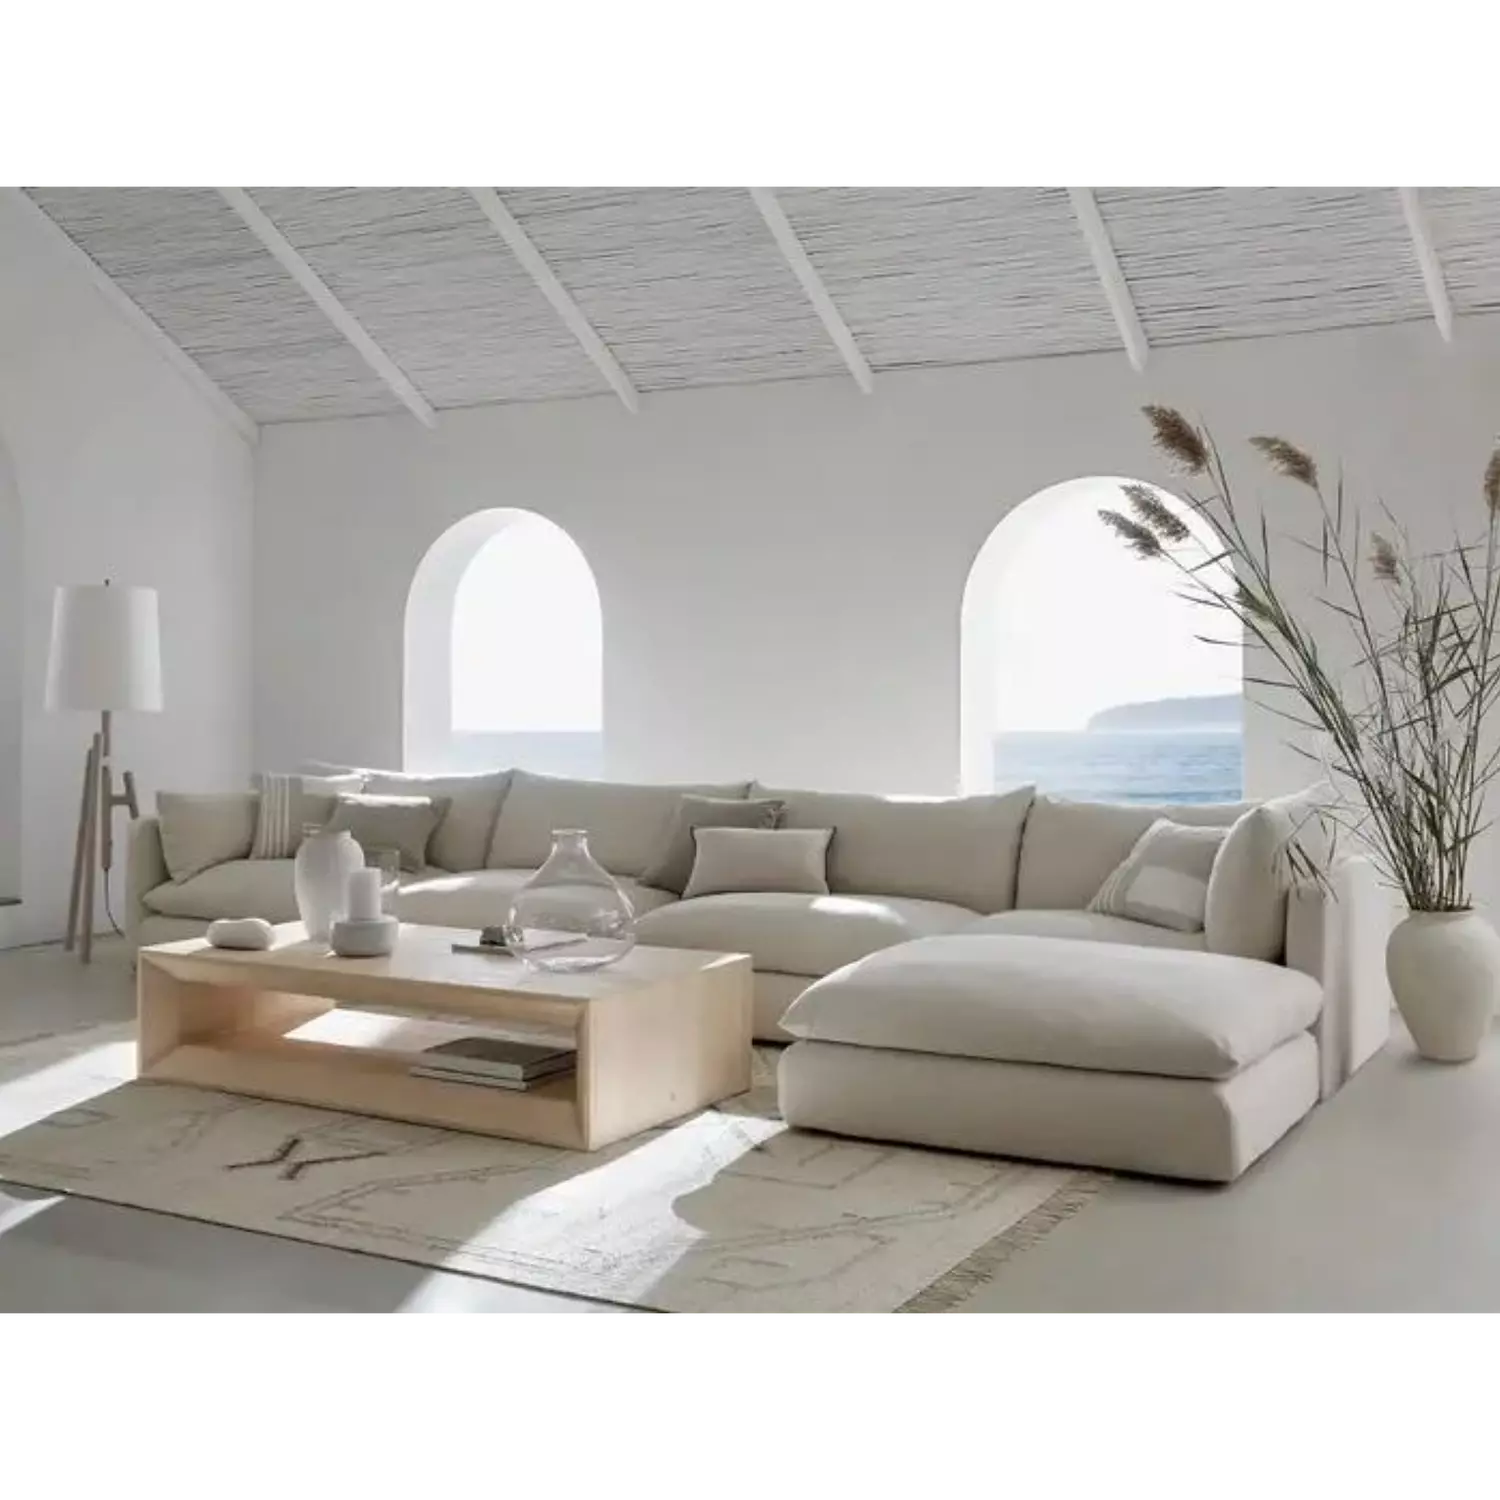 Concoon L shaped sofa hover image